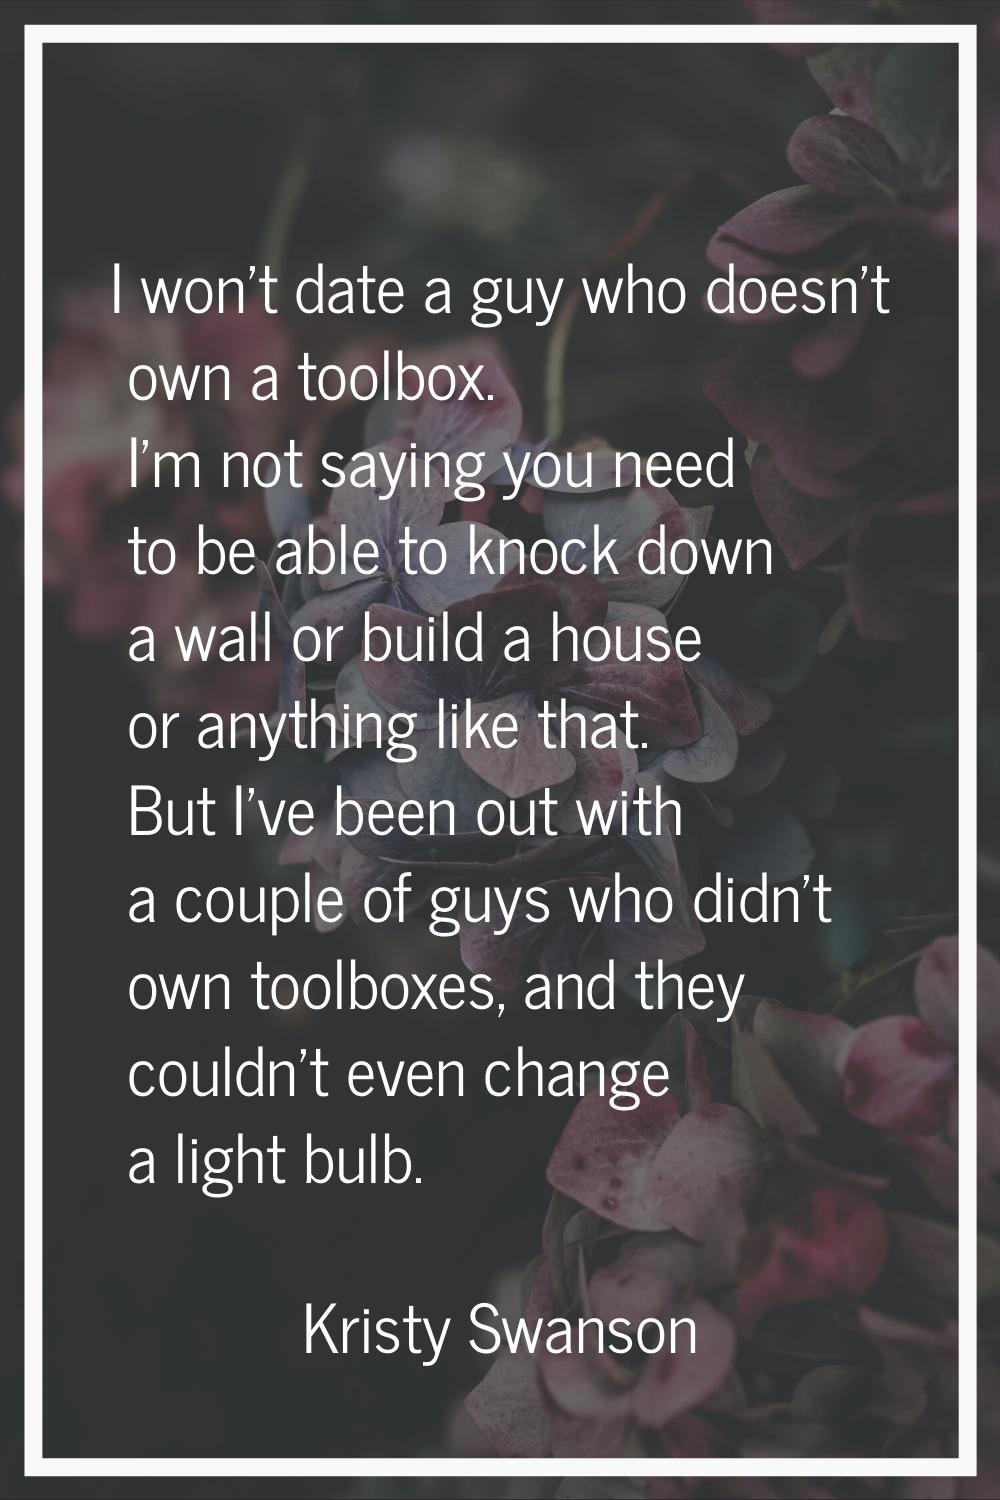 I won't date a guy who doesn't own a toolbox. I'm not saying you need to be able to knock down a wa